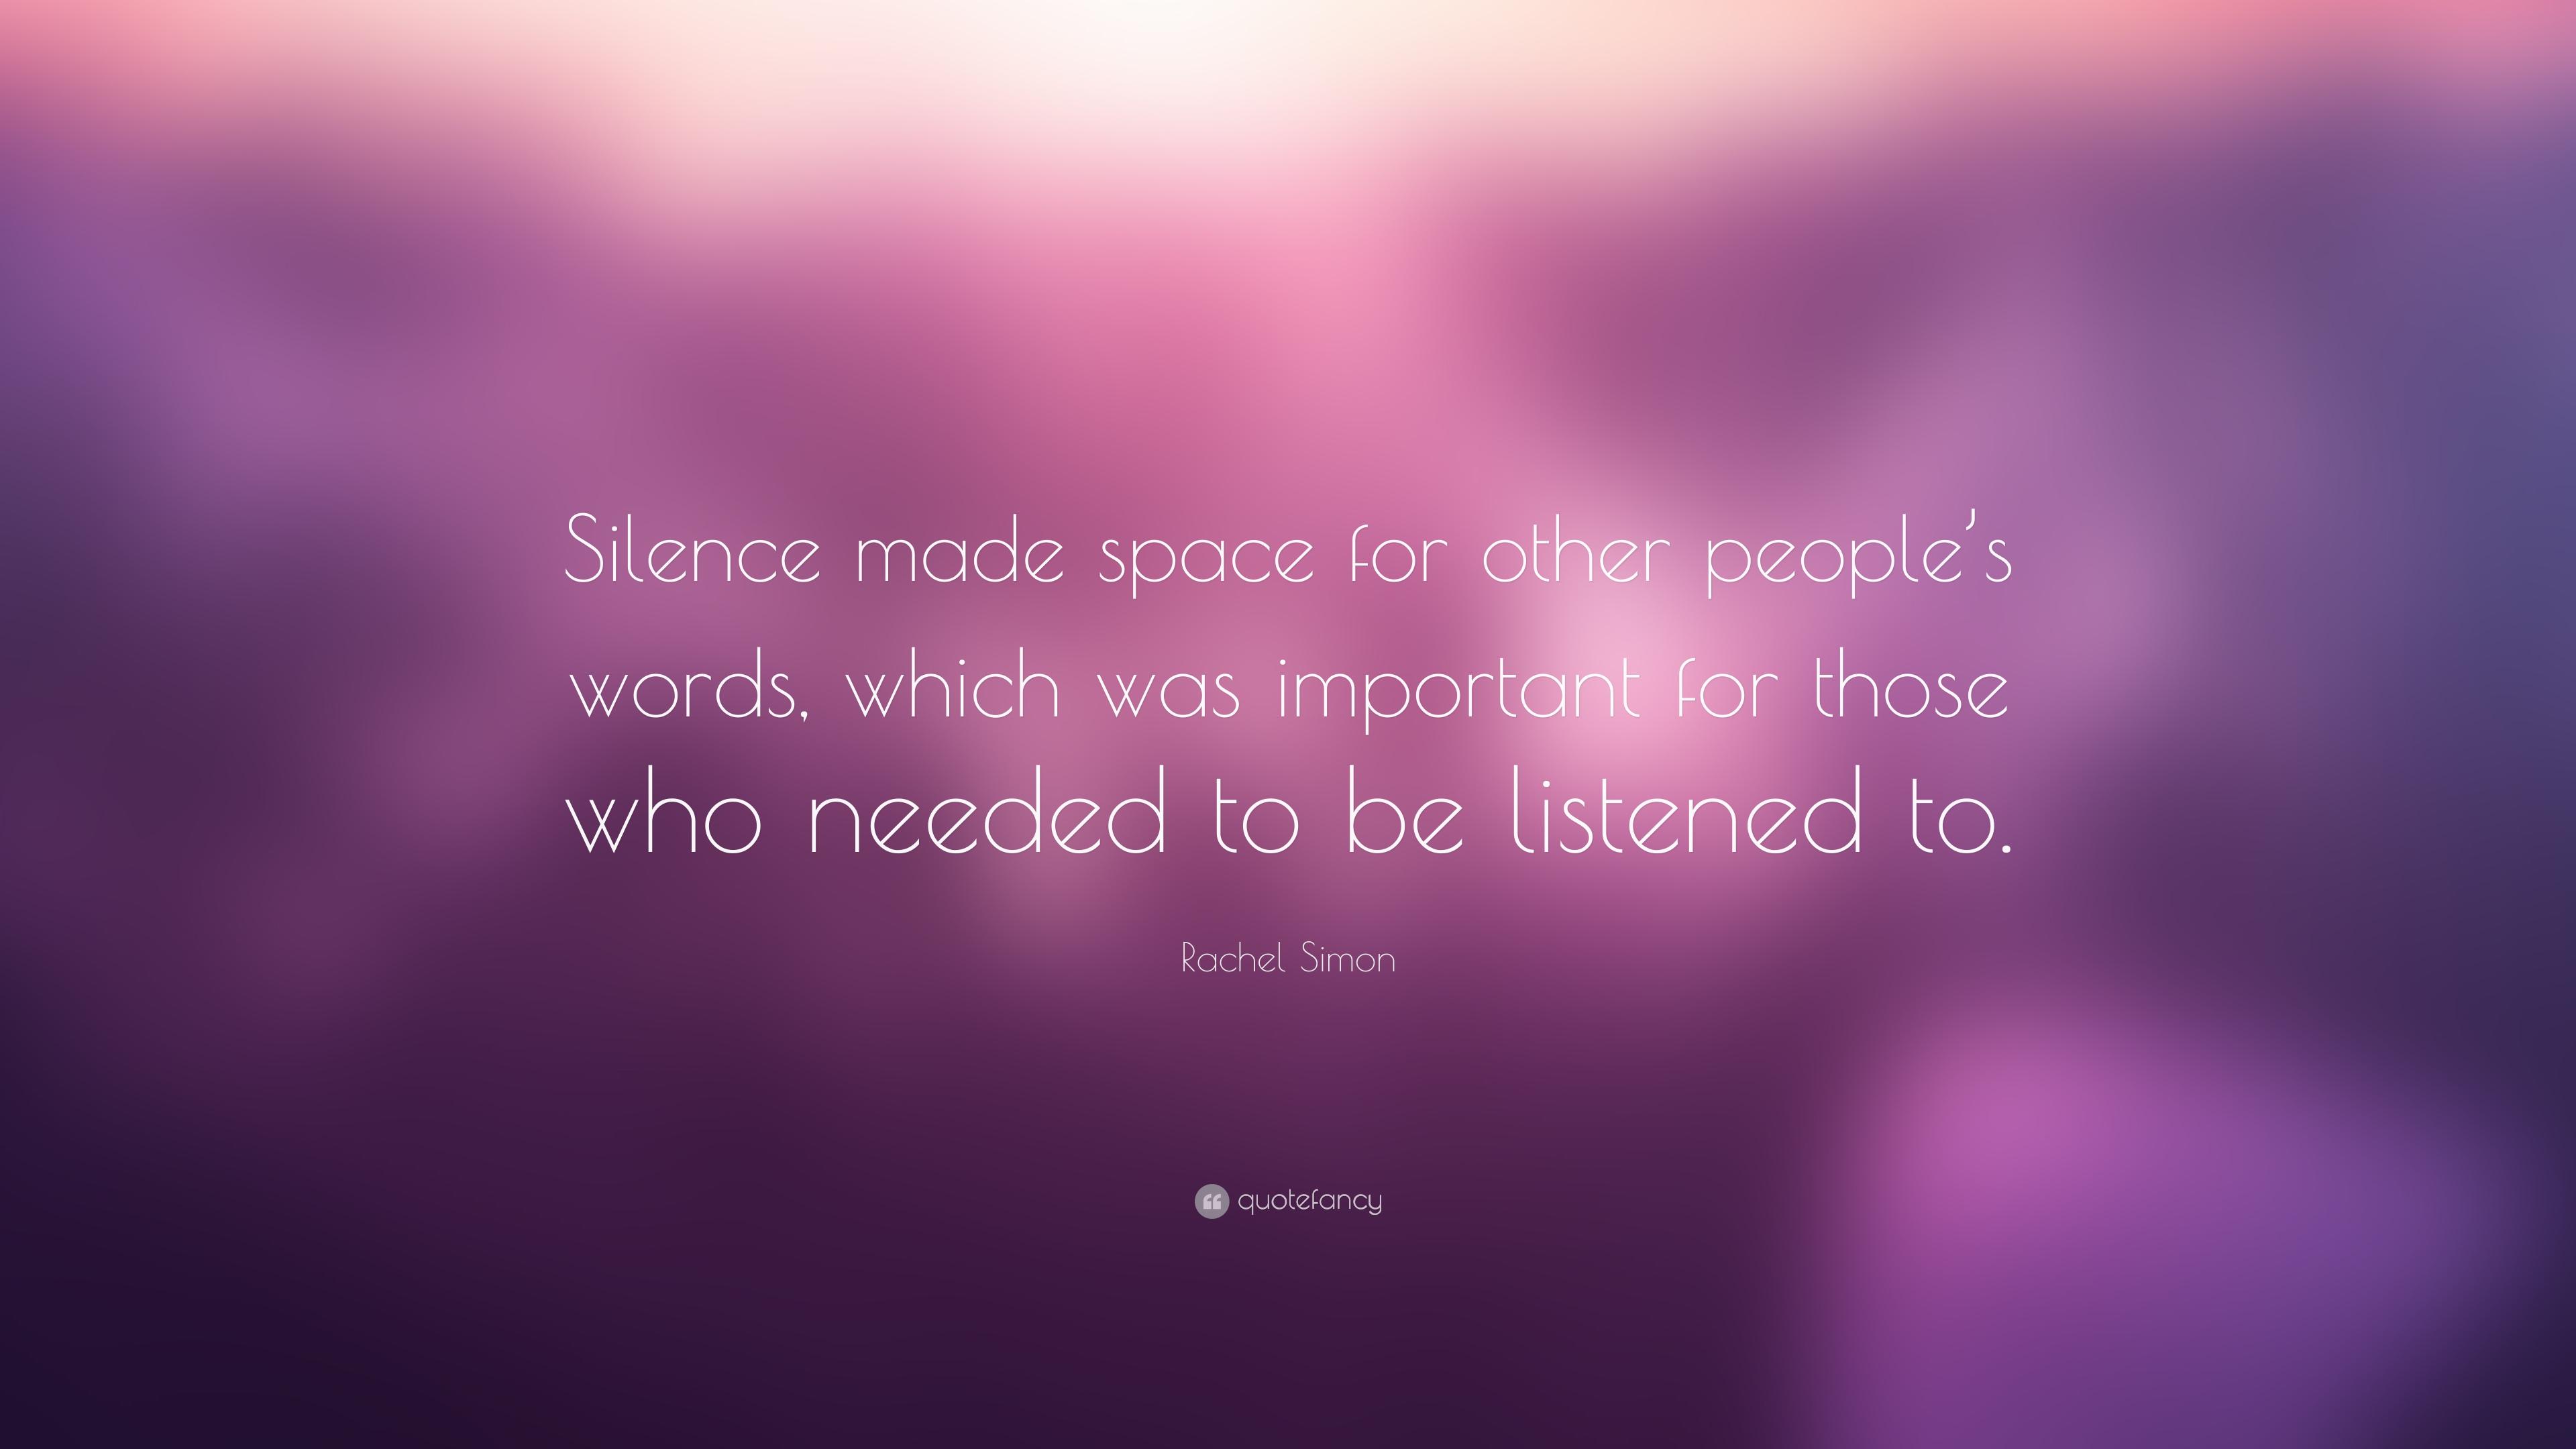 Rachel Simon Quote: “Silence made space for other people's words